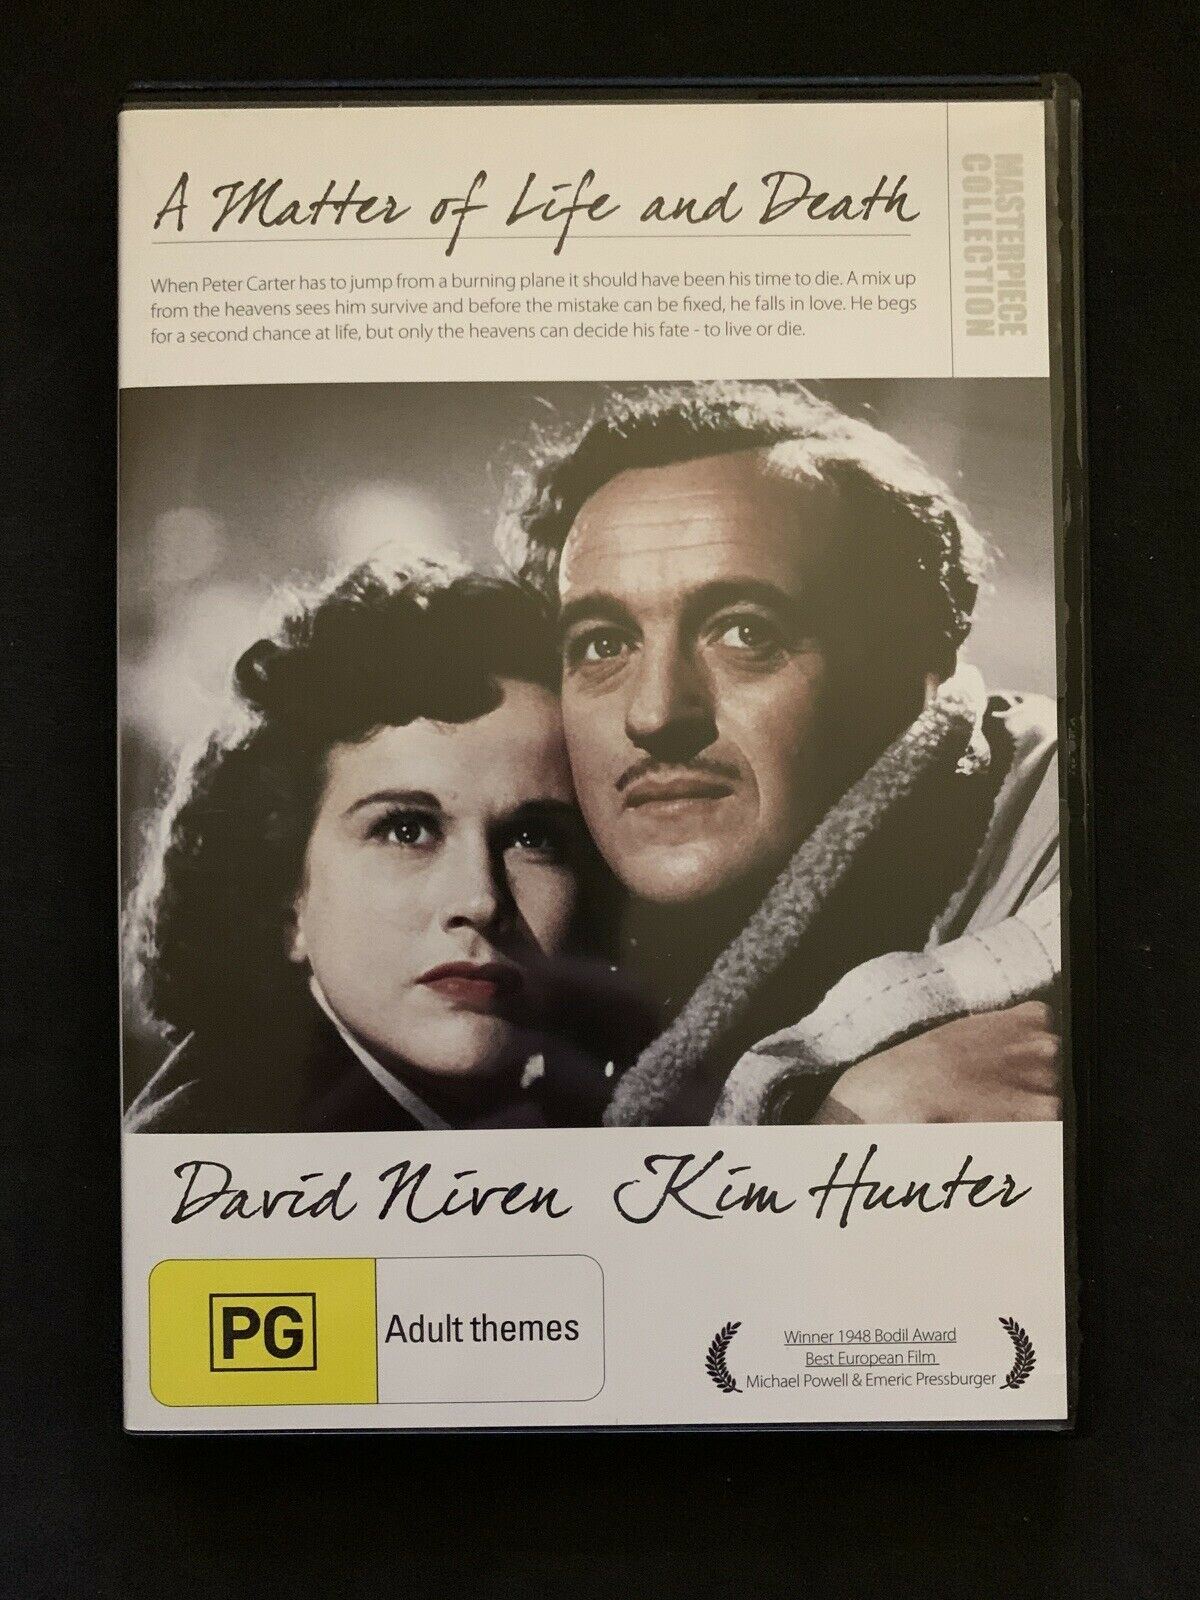 A Matter Of Life And Death (DVD, 1946) David Niven, Roger Livesey. Region 4